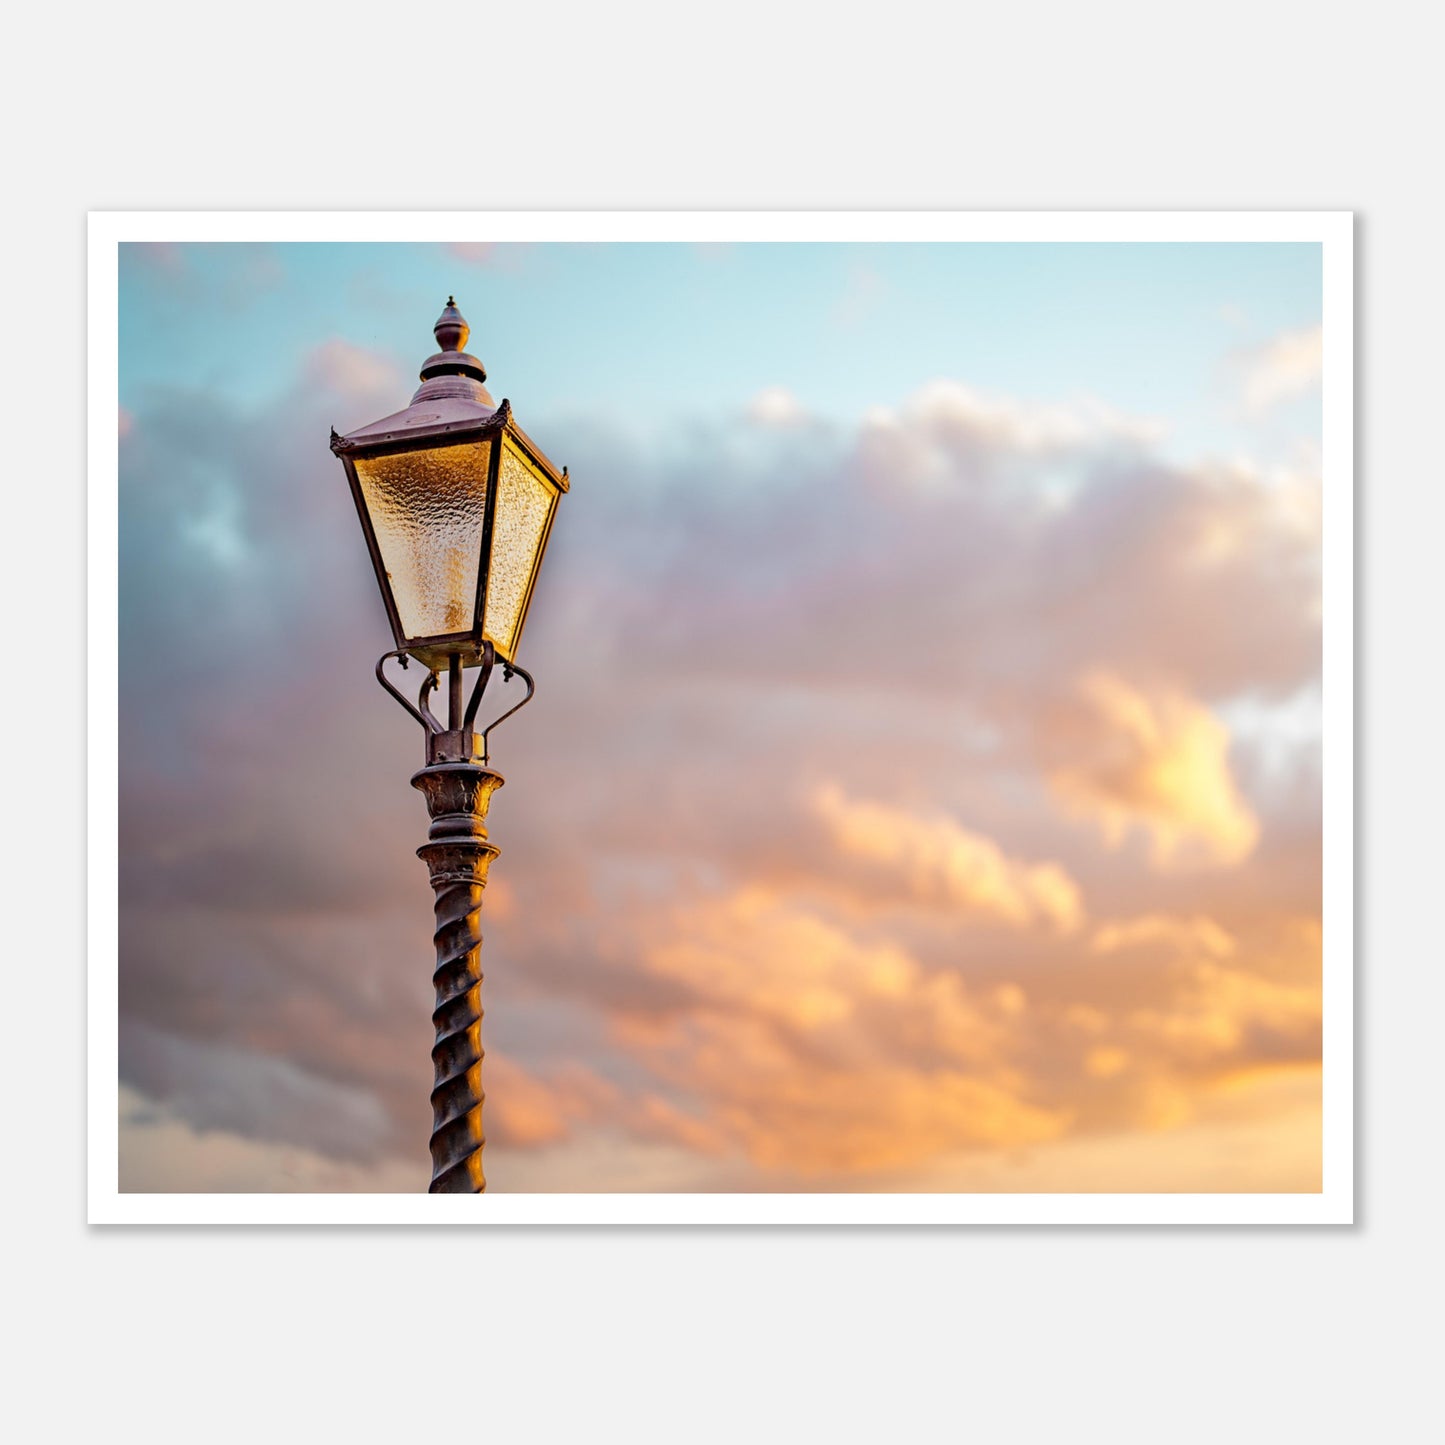 Lamppost at Sunset (Poster)